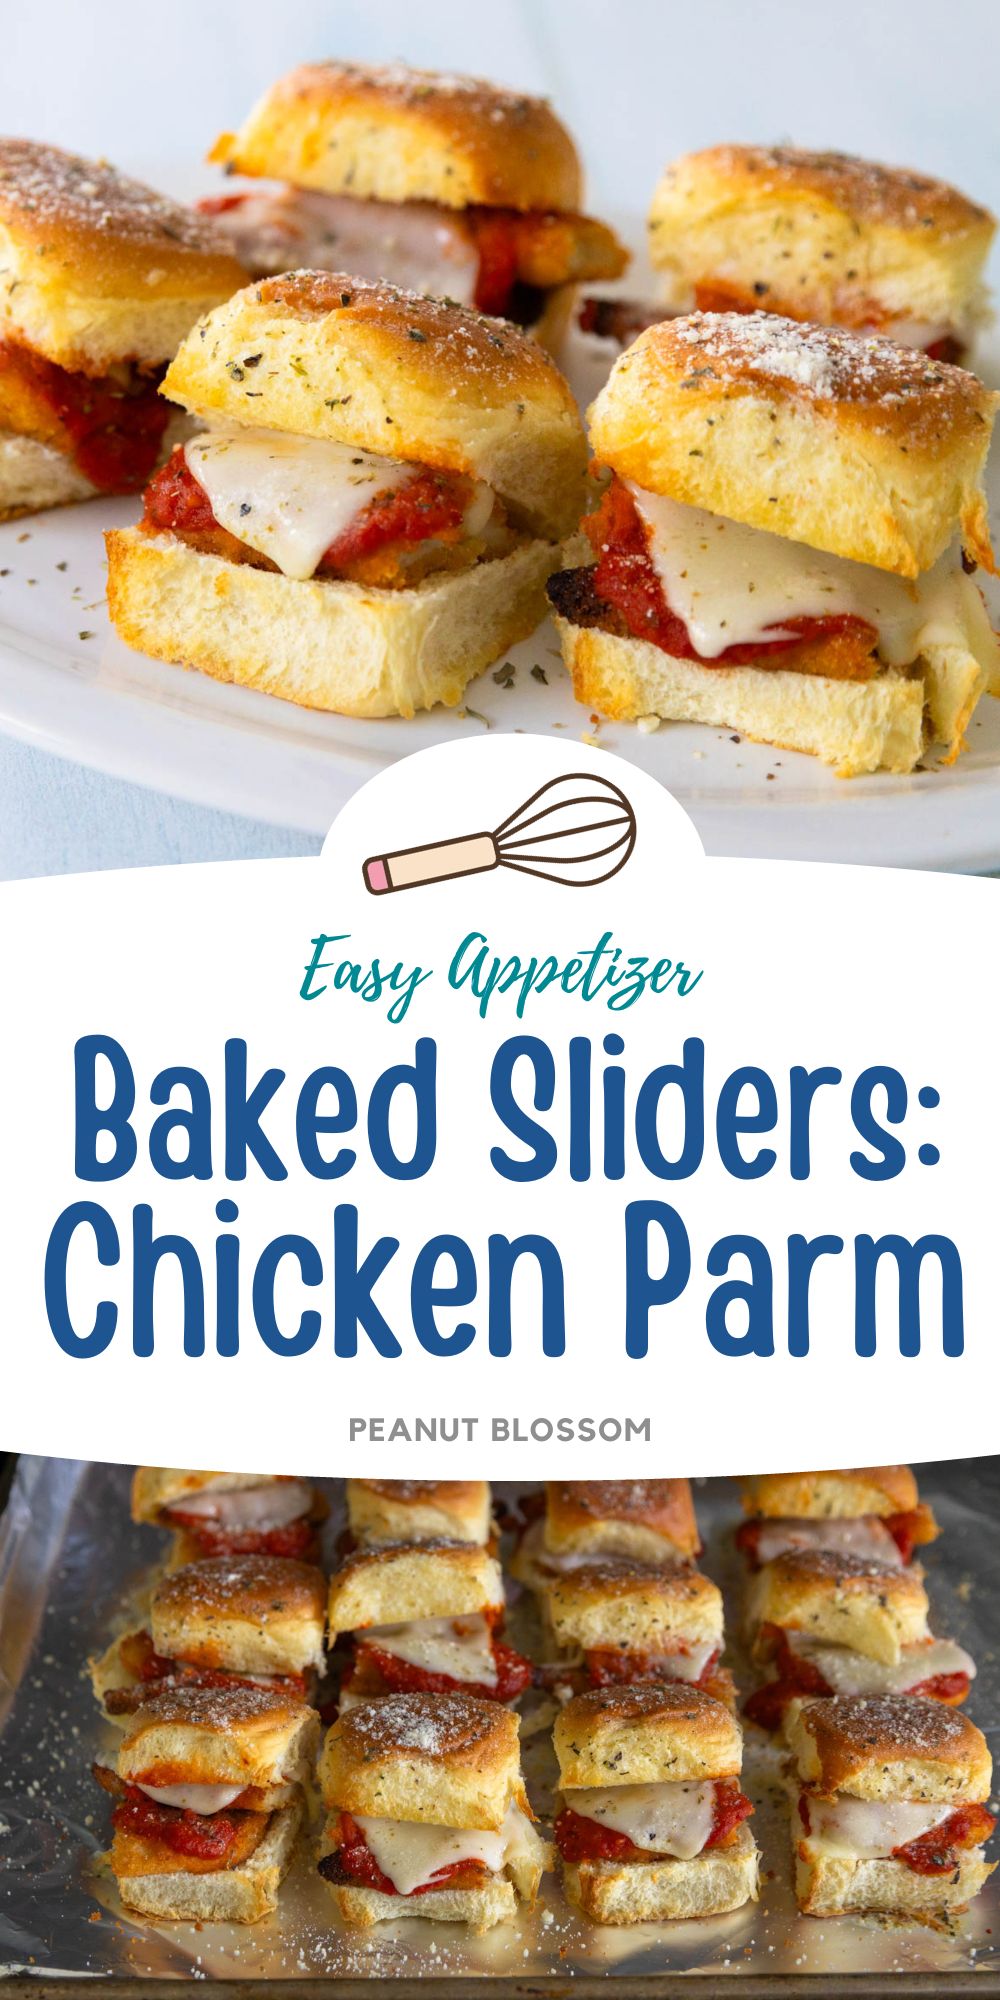 The photo collage shows a platter of chicken parm sliders next to a photo of them baking on a baking sheet.